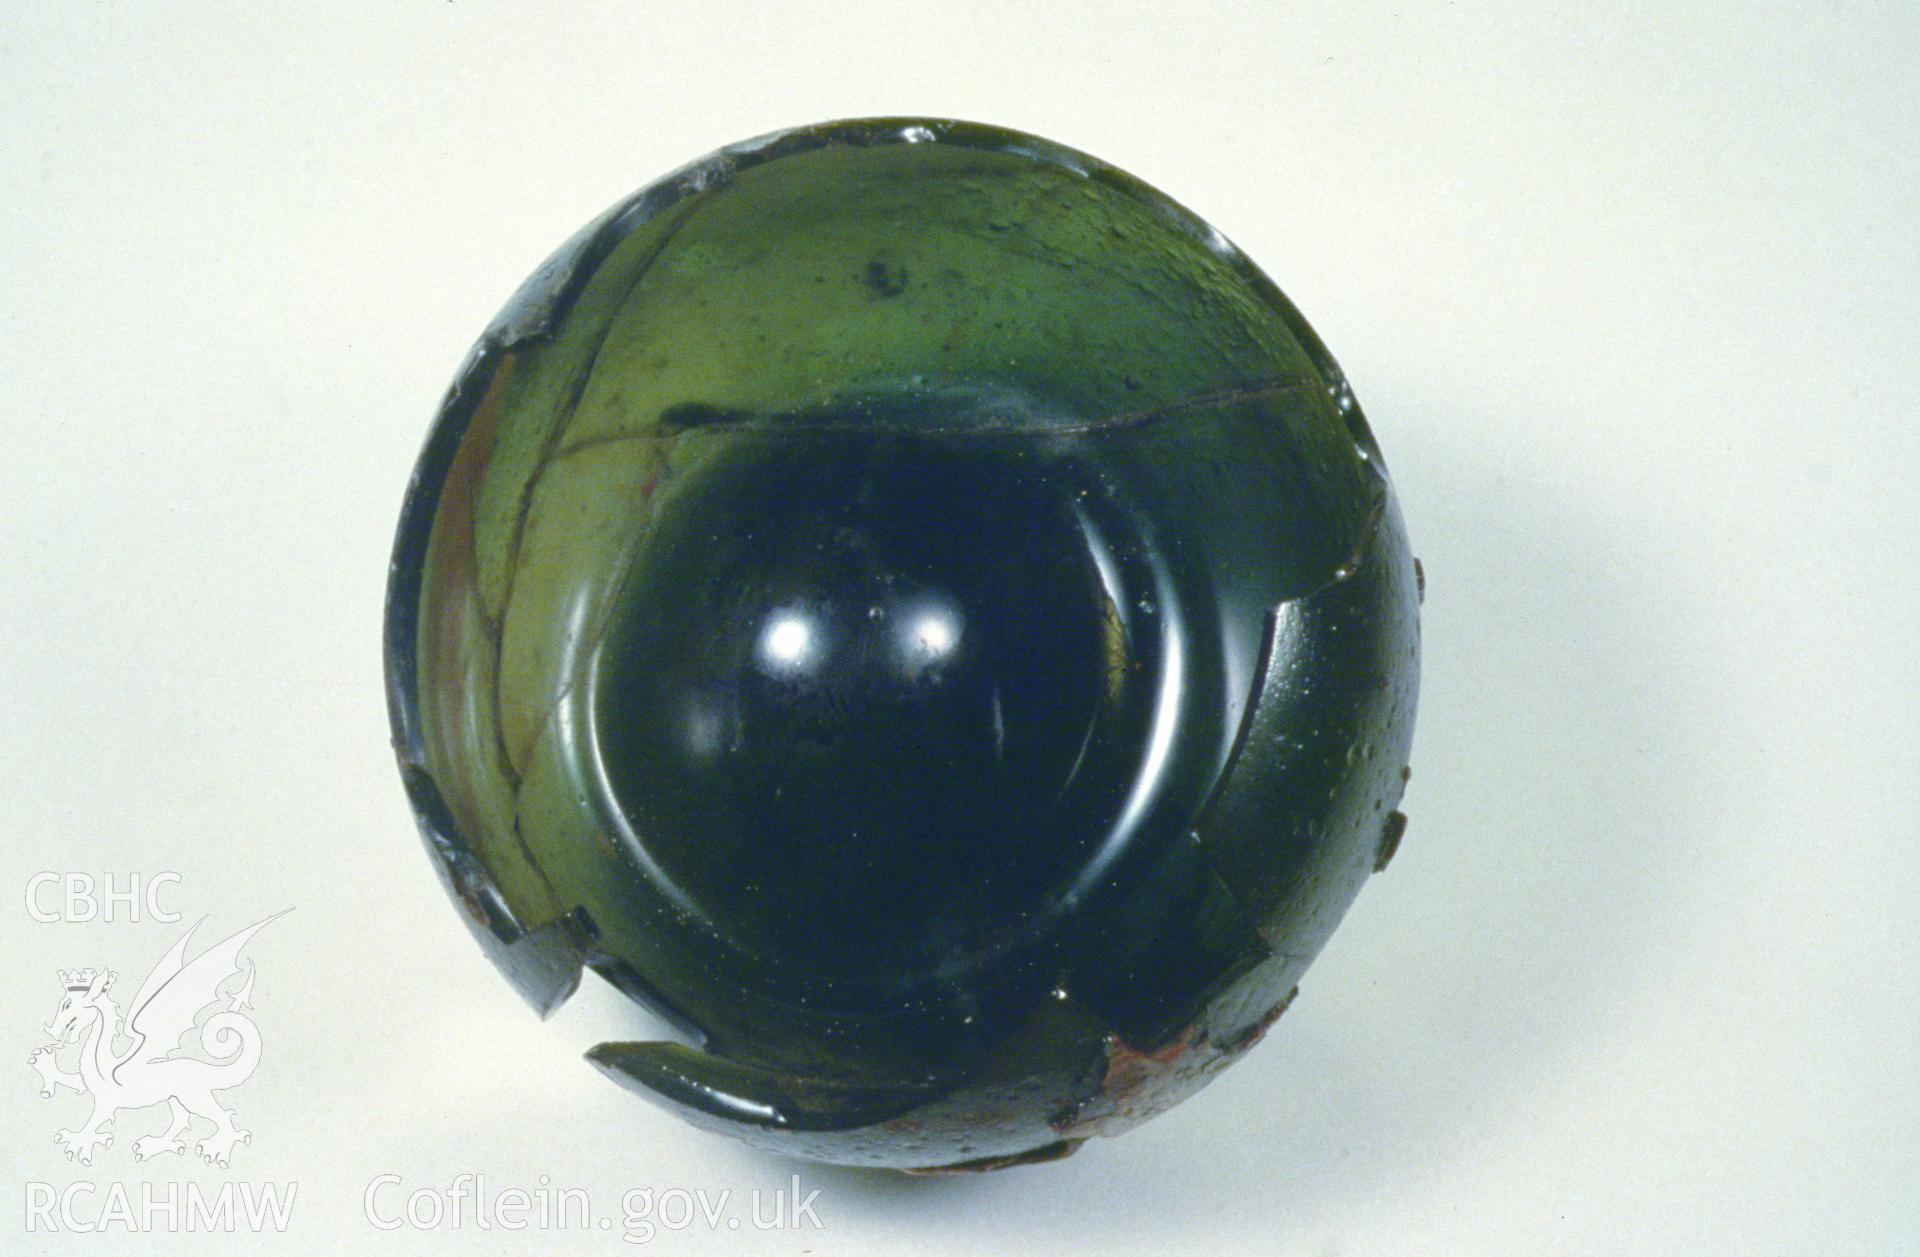 Colour slide showing find from site, glass vessel, from a survey of the Mary designated shipwreck, courtesy of National Museums, Liverpool (Merseyside Maritime Museum)